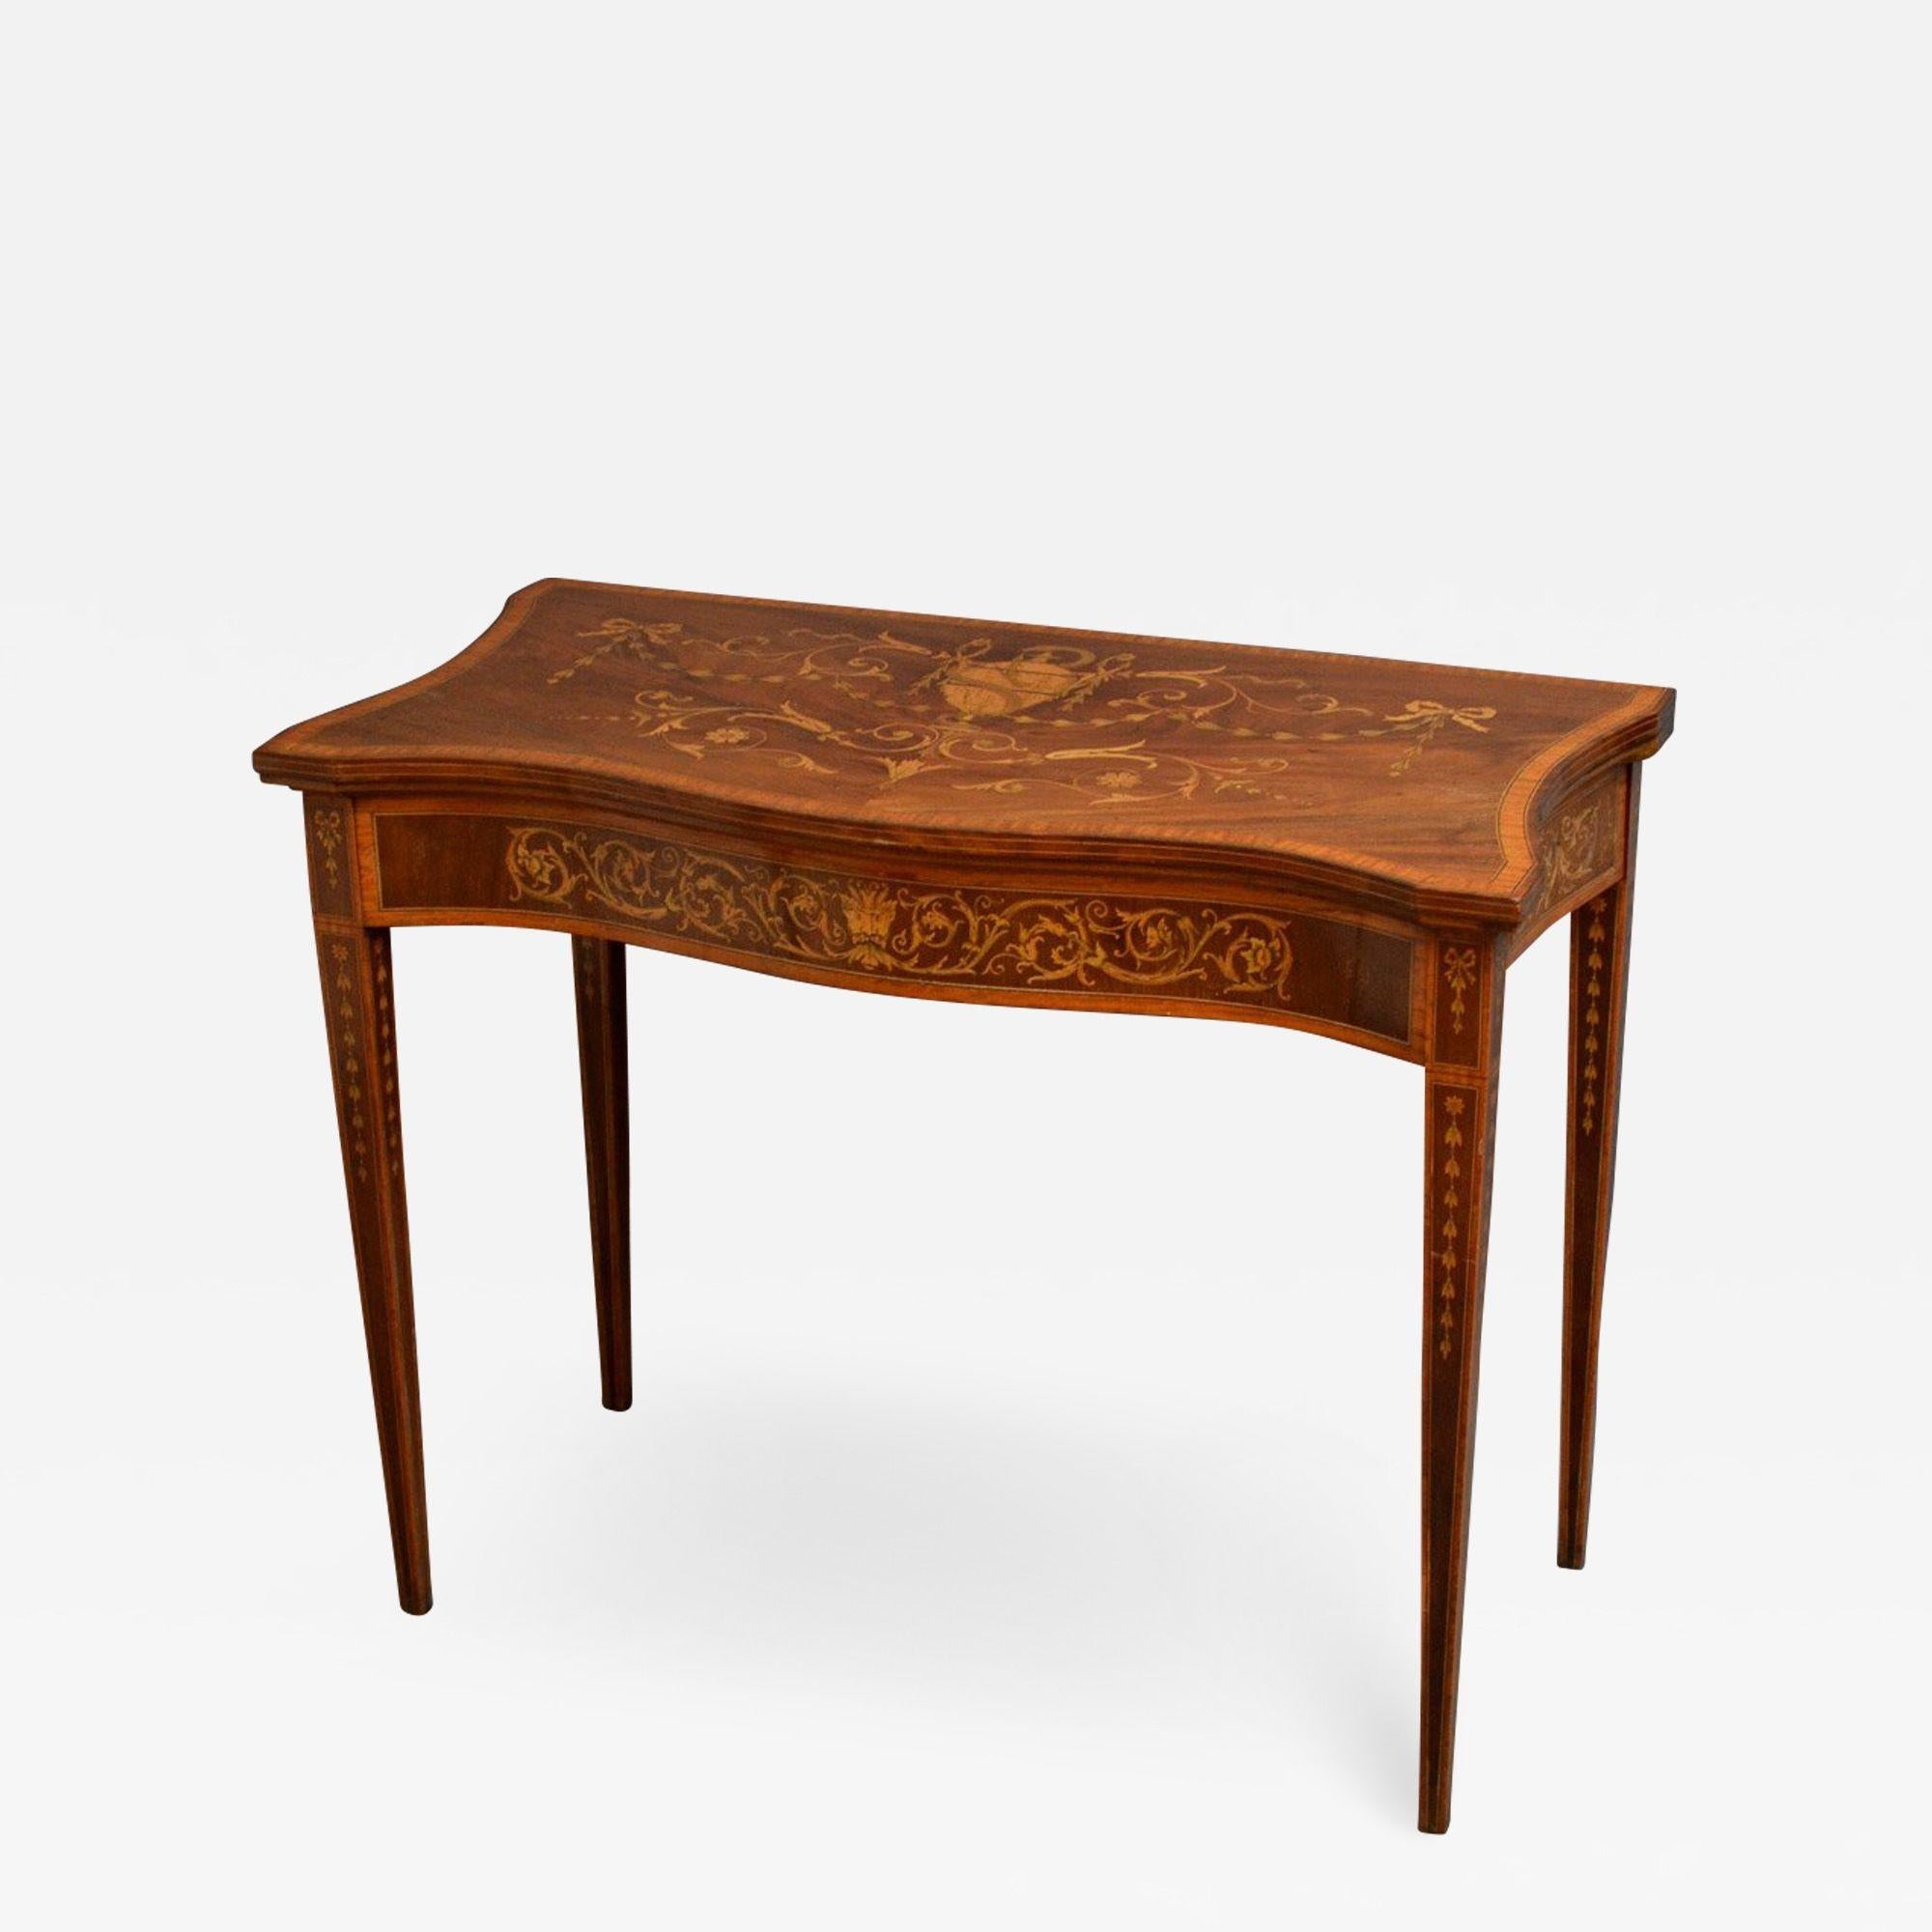 Sn4384 Edwardian Sheraton Revival mahogany and inlaid card table, having finely inlaid serpentine top enclosing green baize games surface, above inlaid and crossbanded frieze, standing on tapered inlaid and crossbanded legs. This antique games table